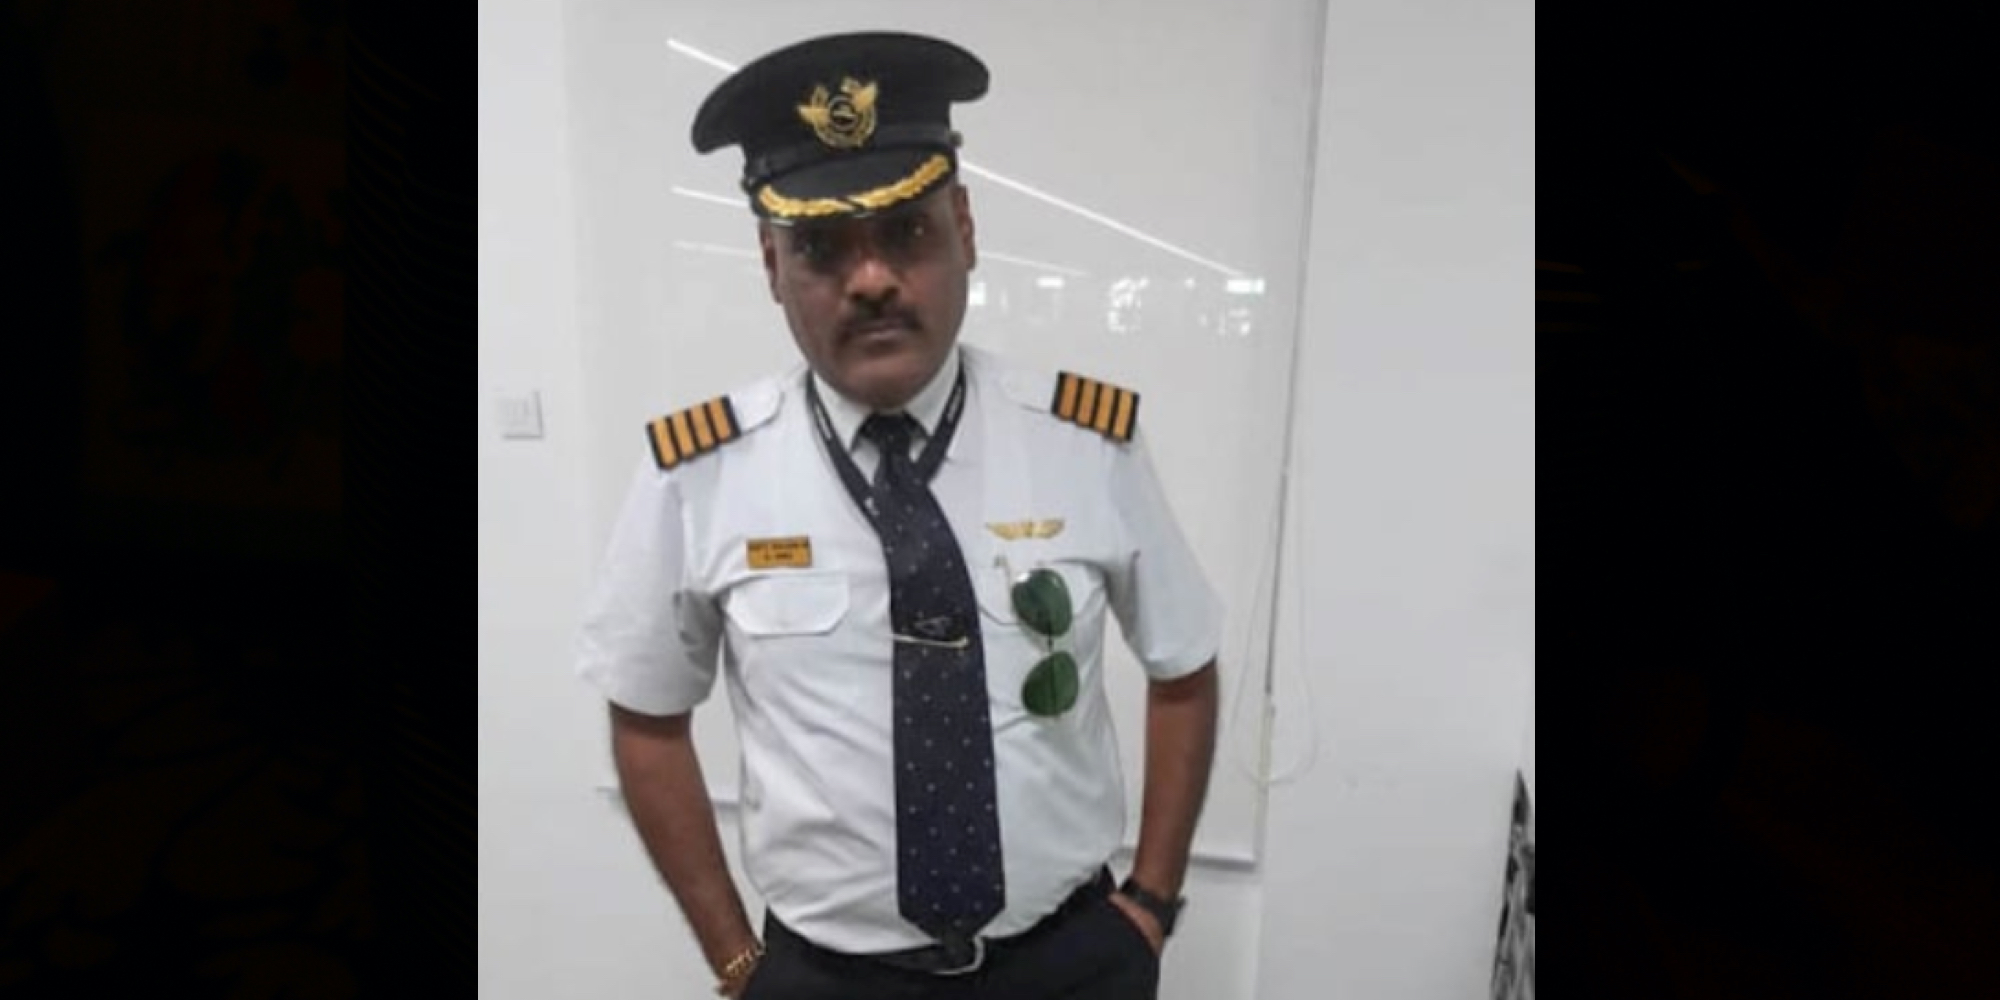 A man in India dressed up as a pilot and used his disguise to skip lines and get free upgrades, police say